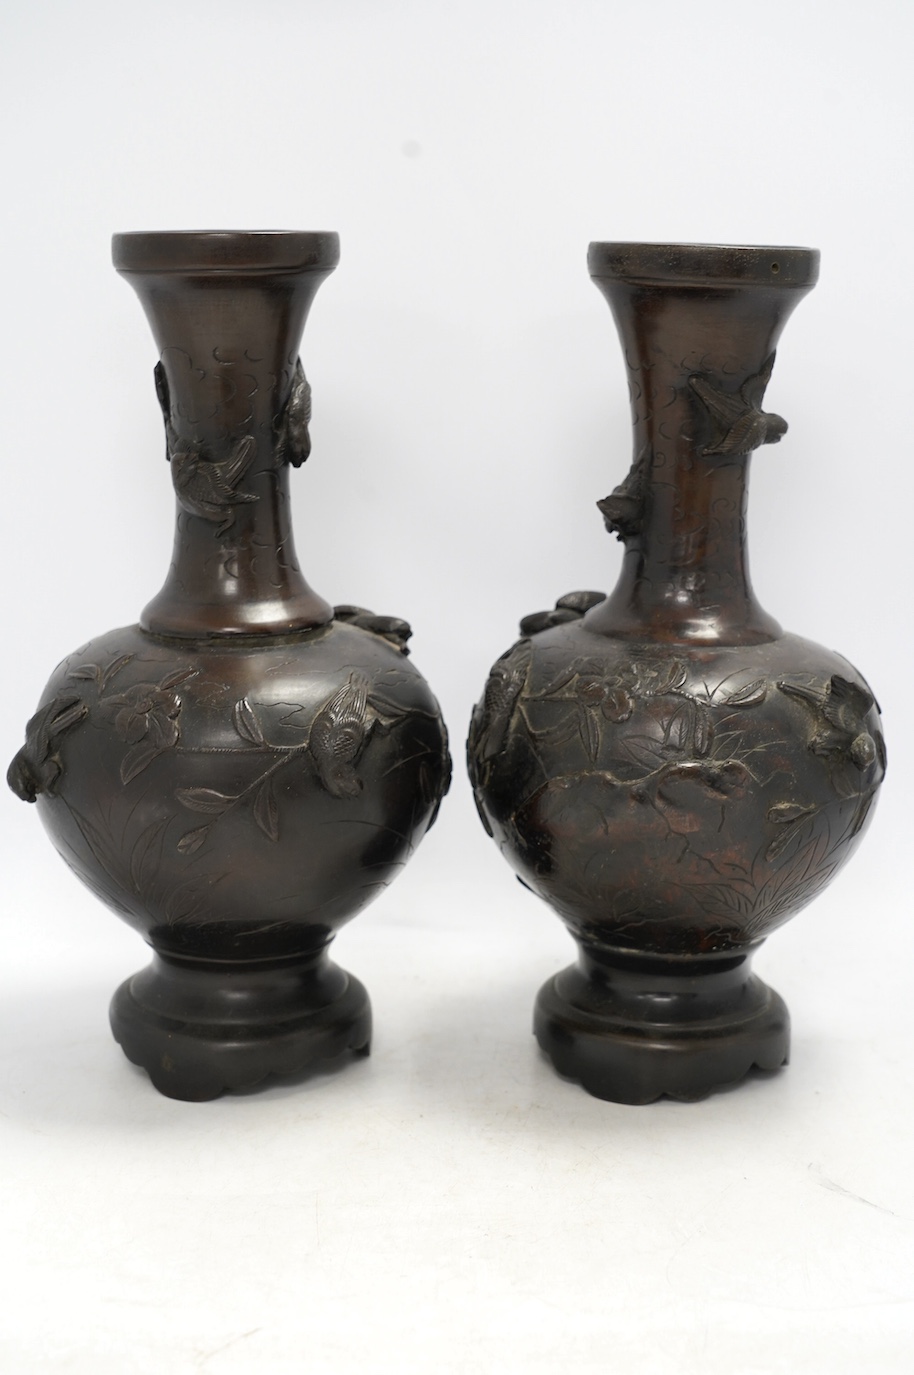 A pair of Chinese bronze vases, 31cm high. Condition - poor